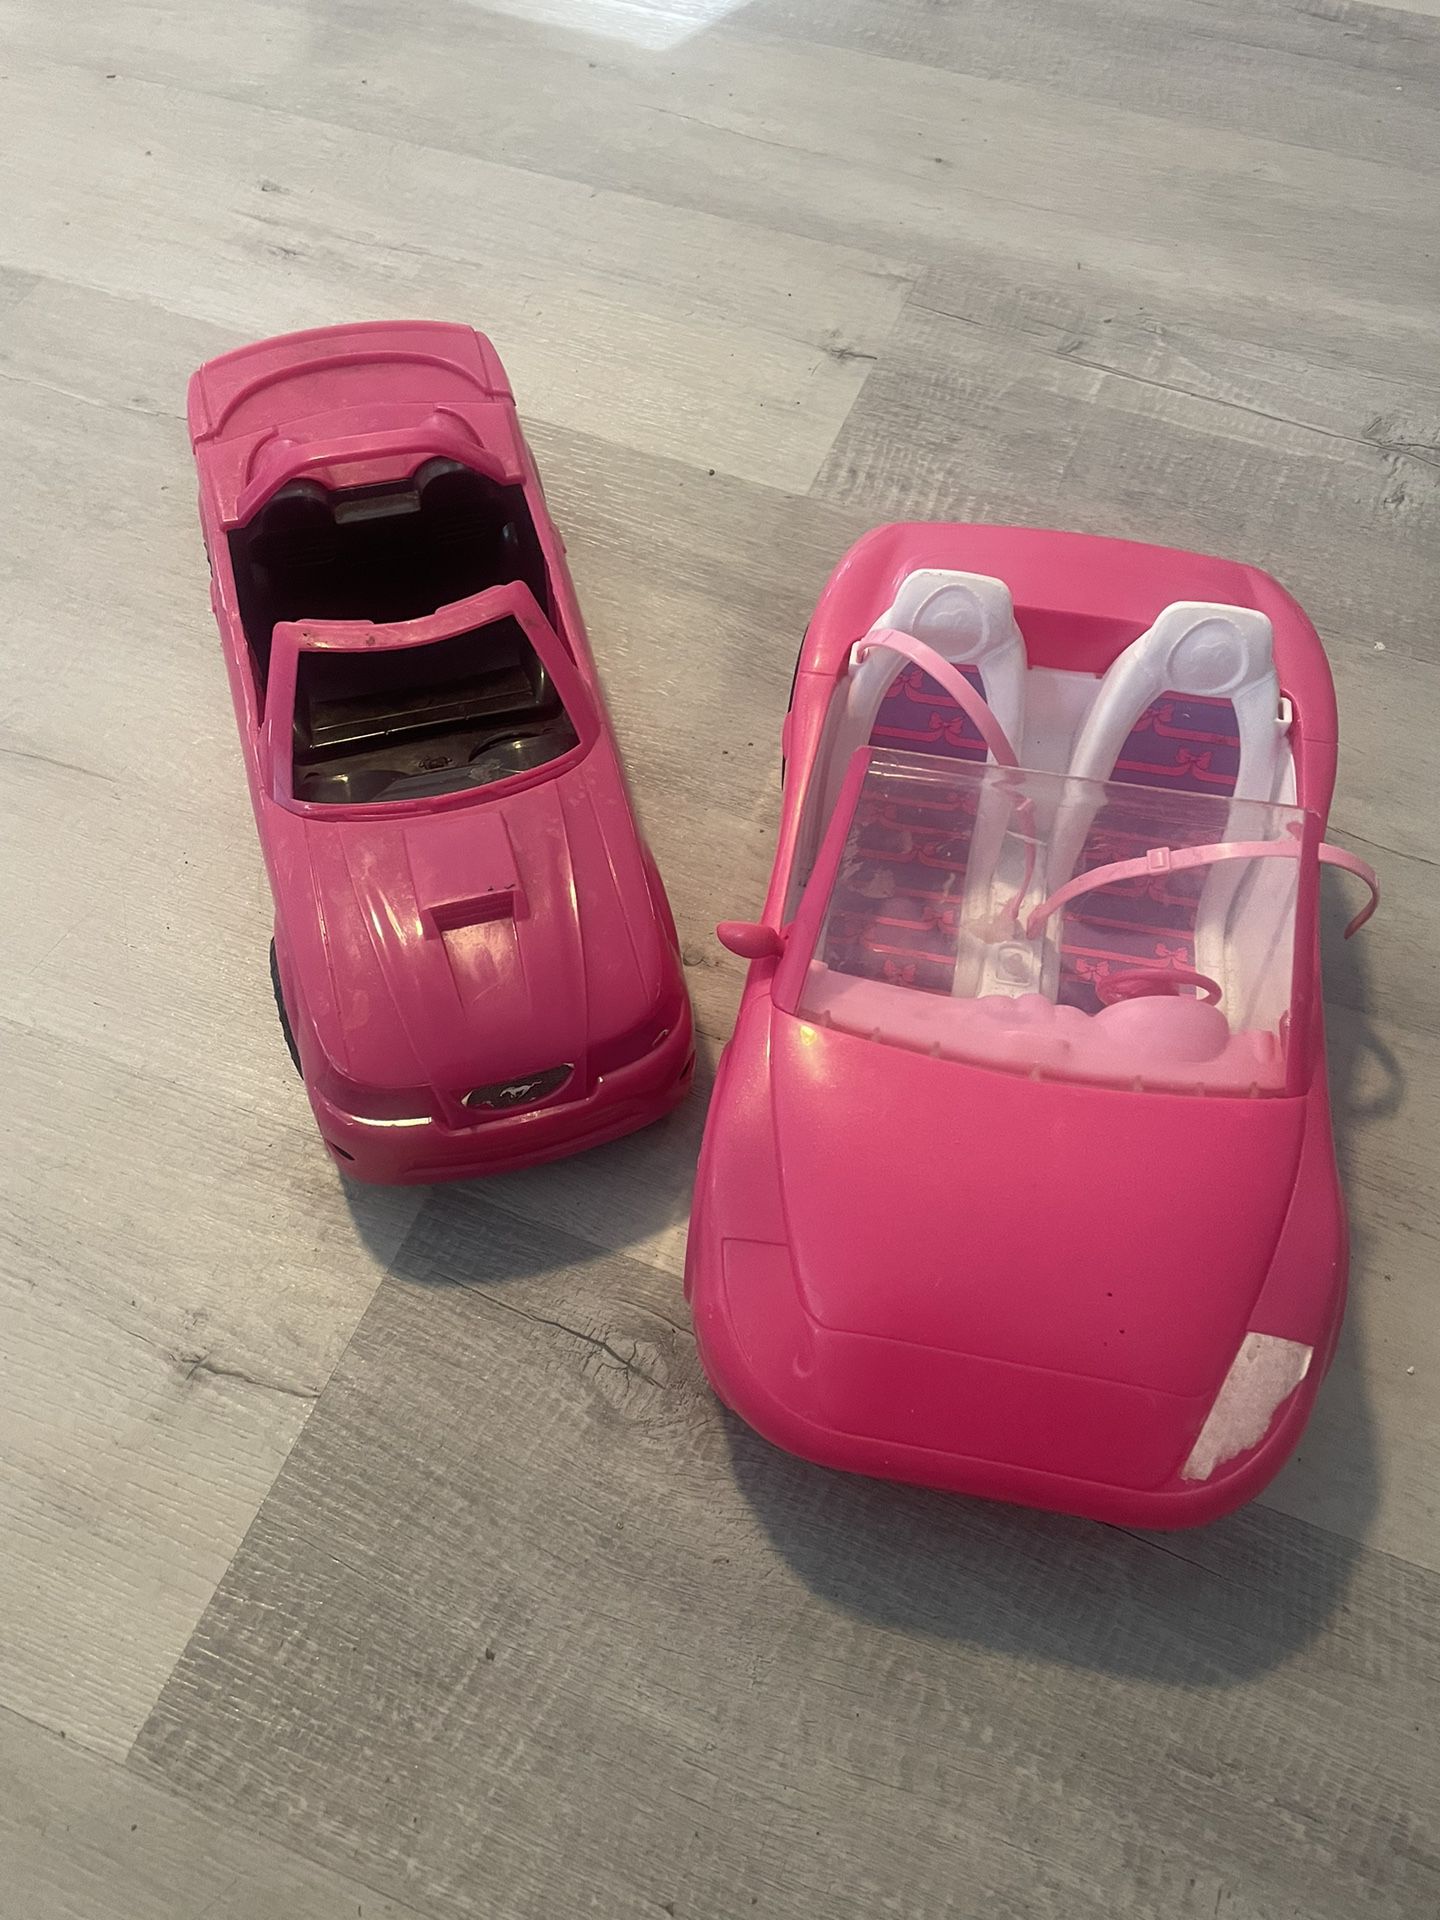 two Cars For Barbie Dolls Left Then The Price Of One New